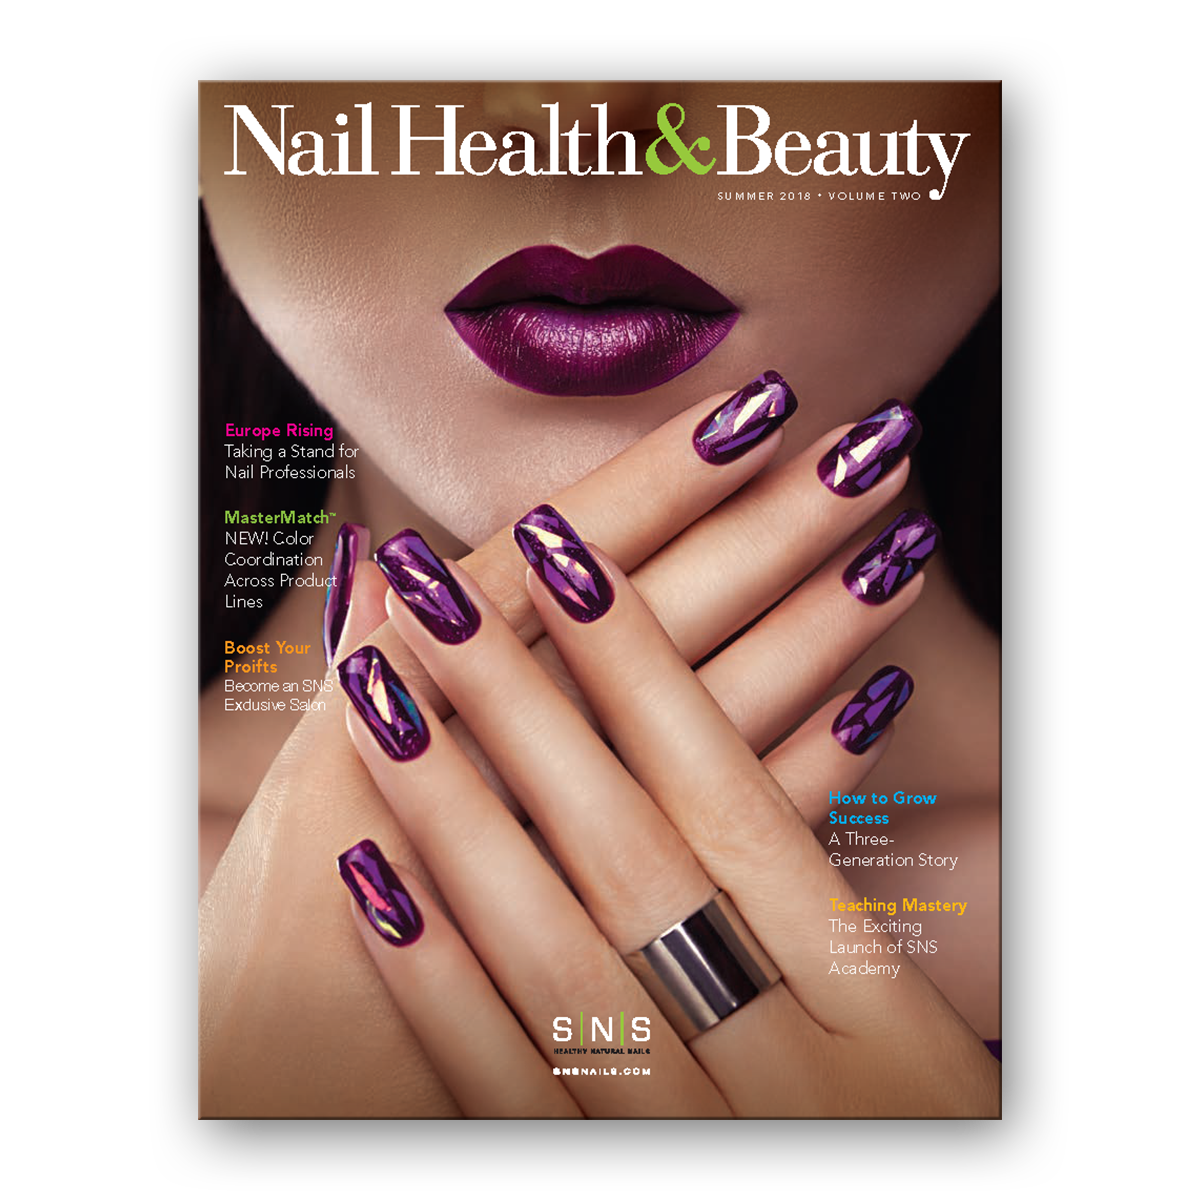 SNS Nails & How to Choose From Over 1000 SNS Colours – Beauty and Nails